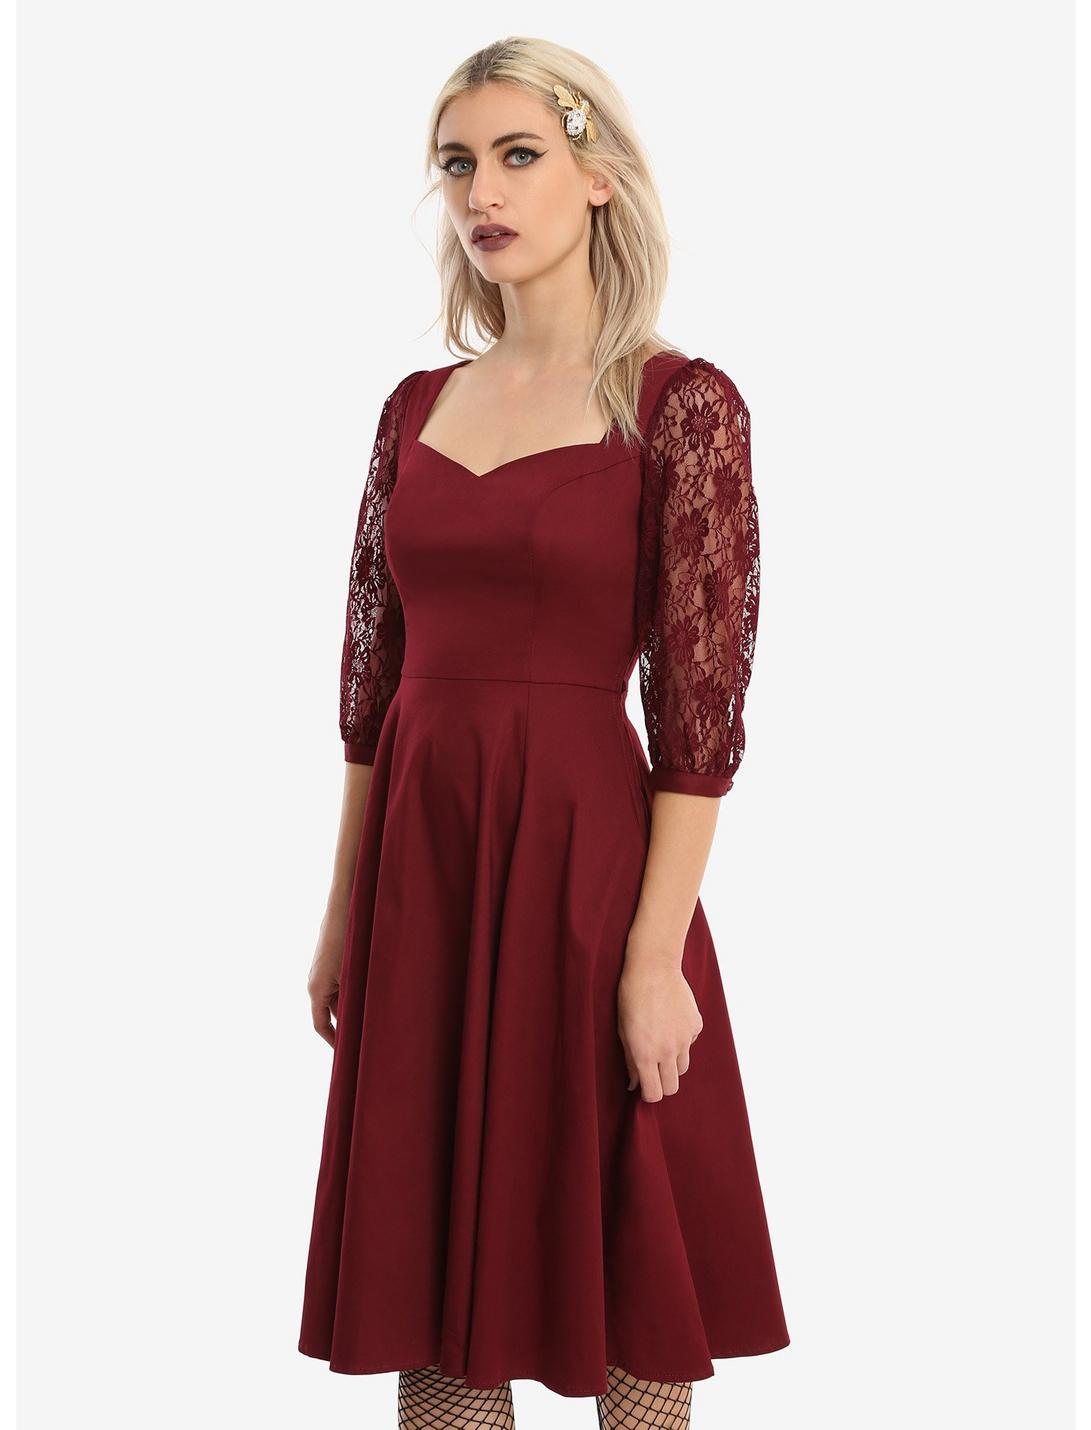 Burgundy Lace Sleeve Swing Dress, RED, hi-res